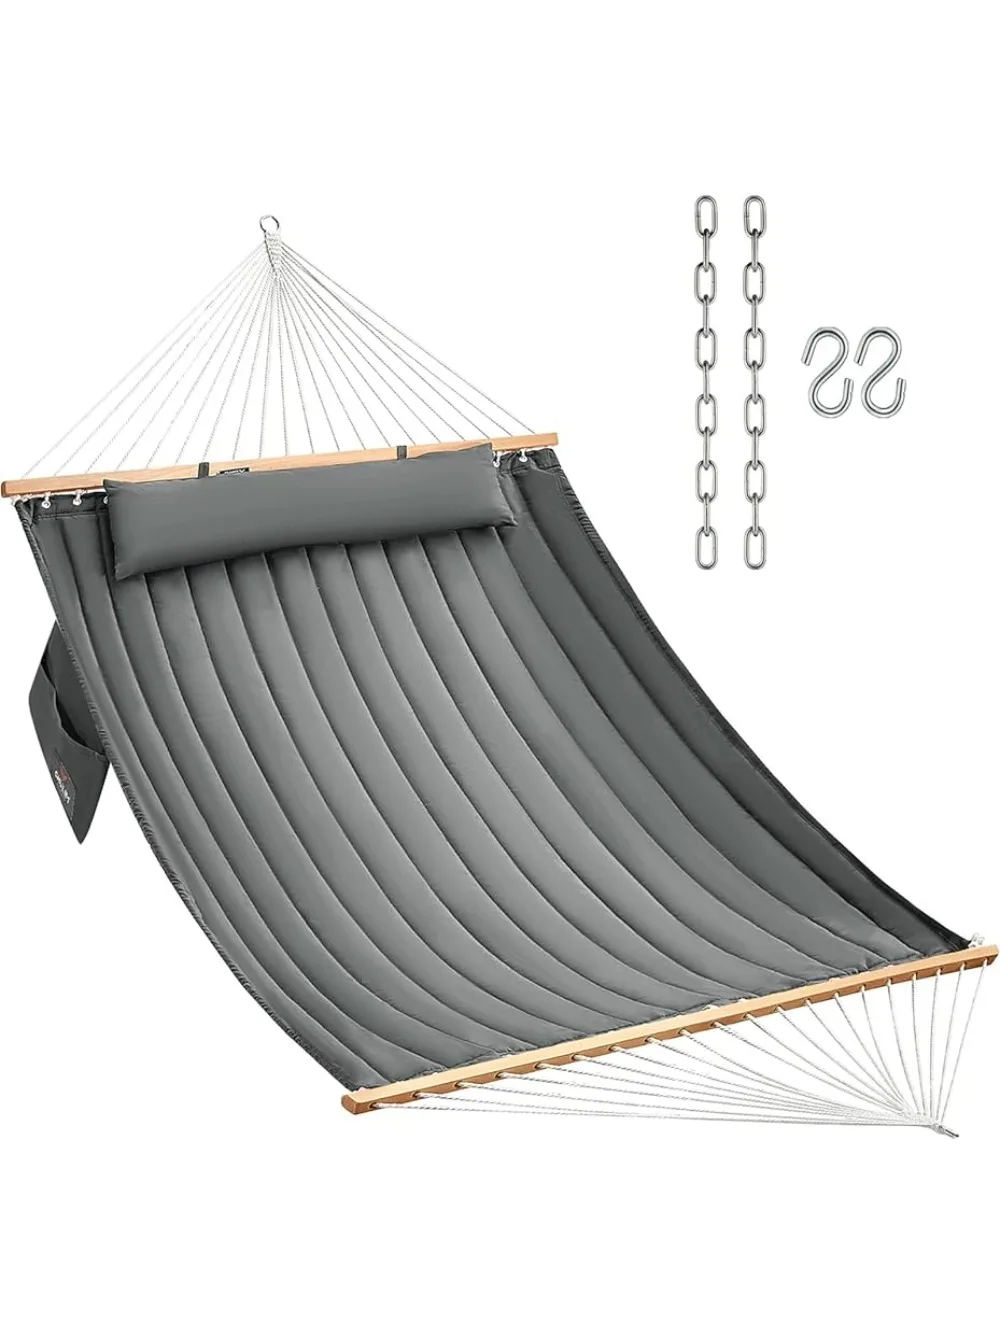 

With Hardwood Spreader Bar and Pillow 450 Lb Capacity Hanging Hammock Chair Double Quilted Fabric Hammock Hammocks Outdoor Swing